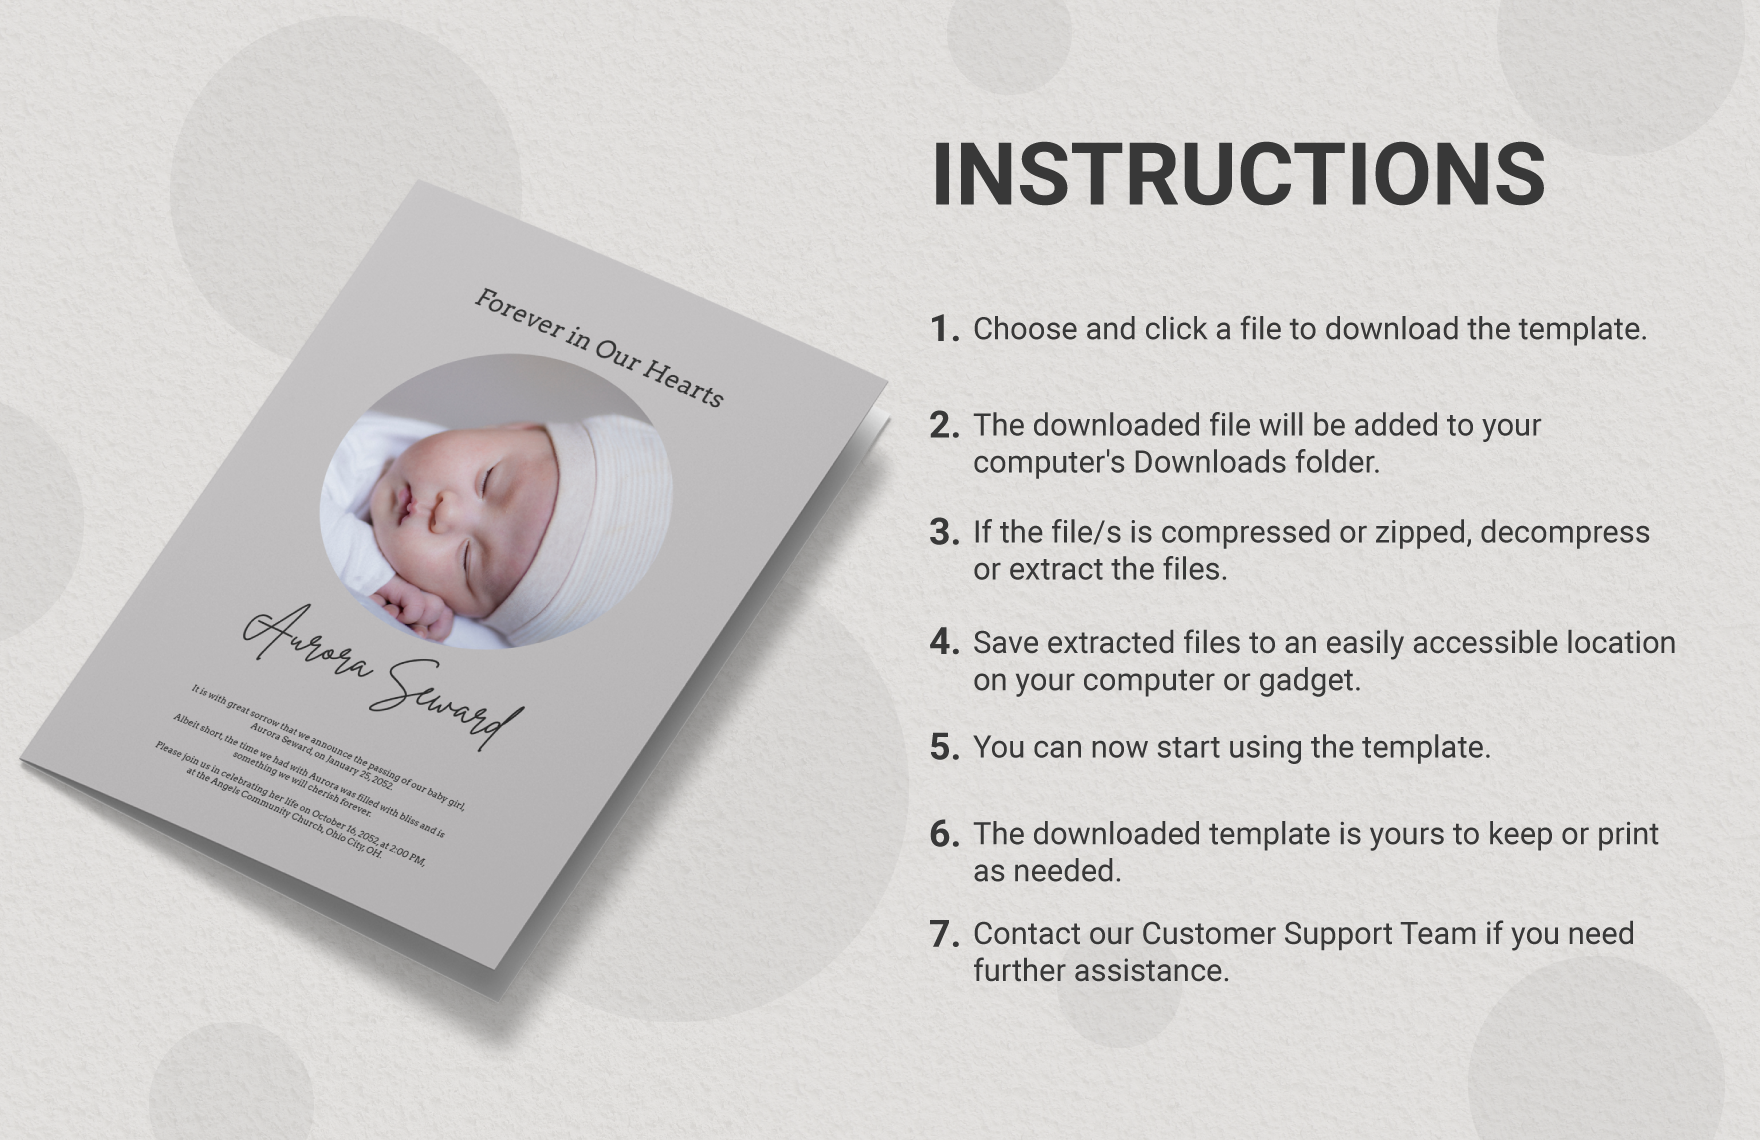 Baby Obituary Template